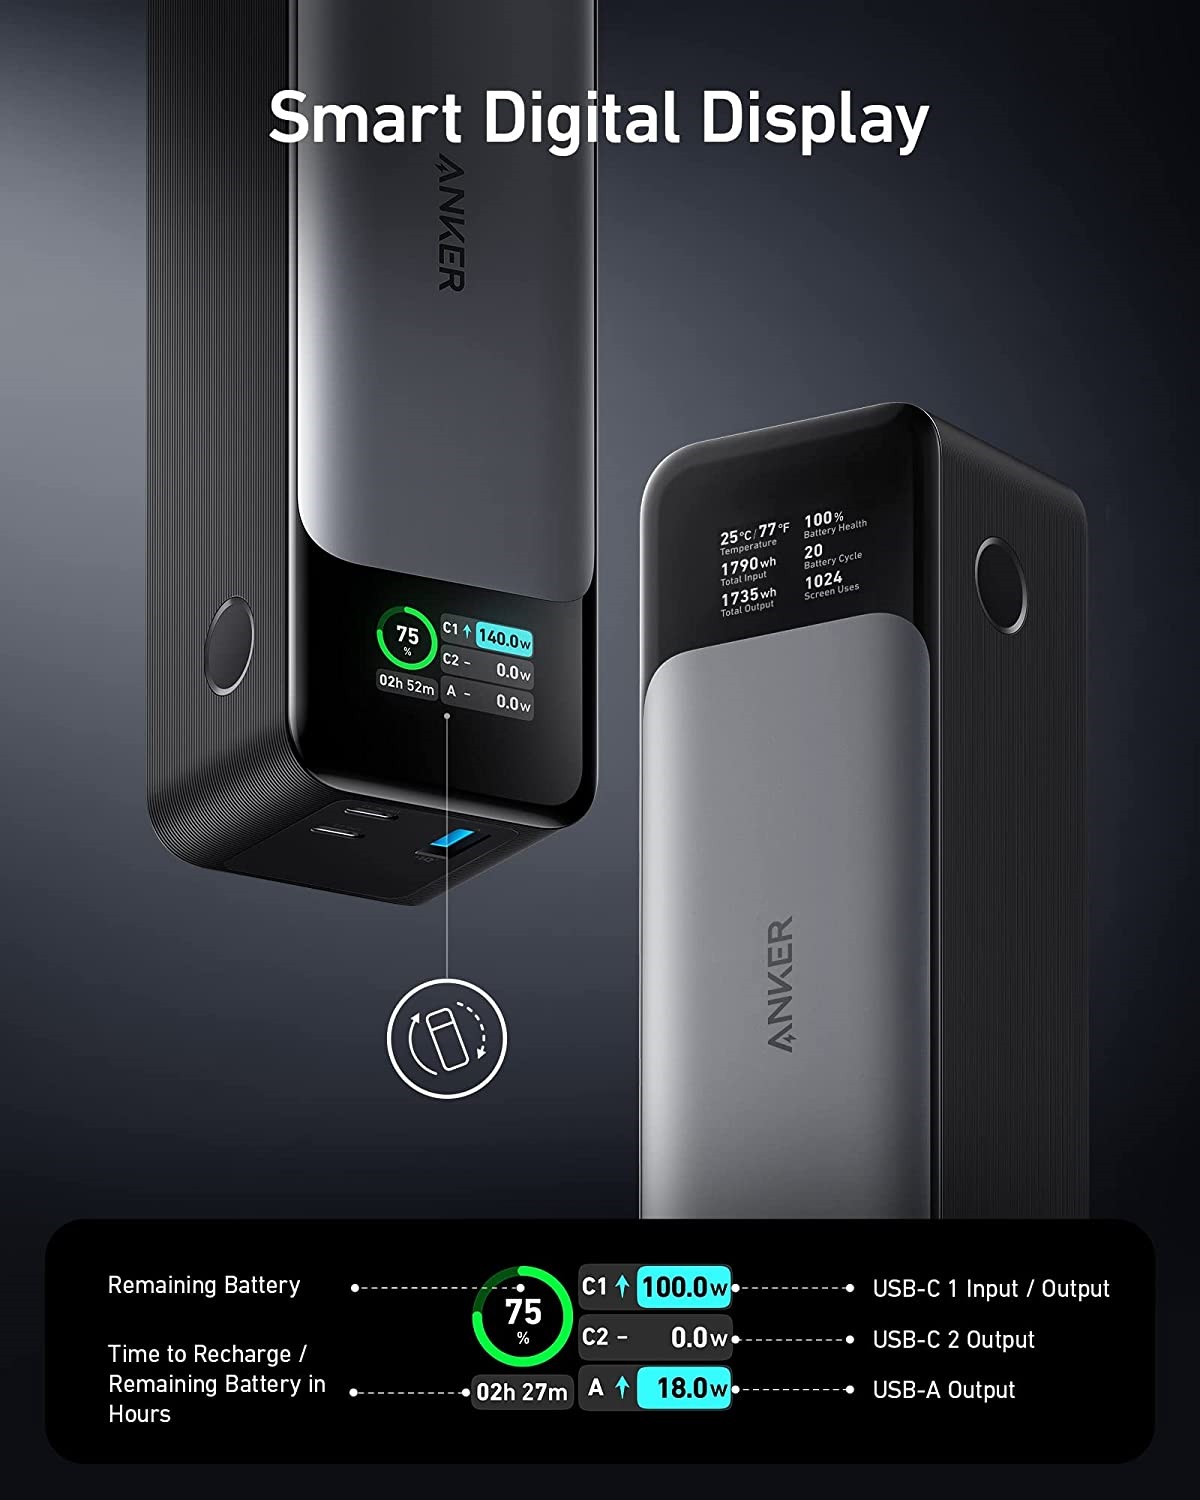 ANKER Powerbank 24.000mAh 3-Port with 140W Output and Smart Digital Display